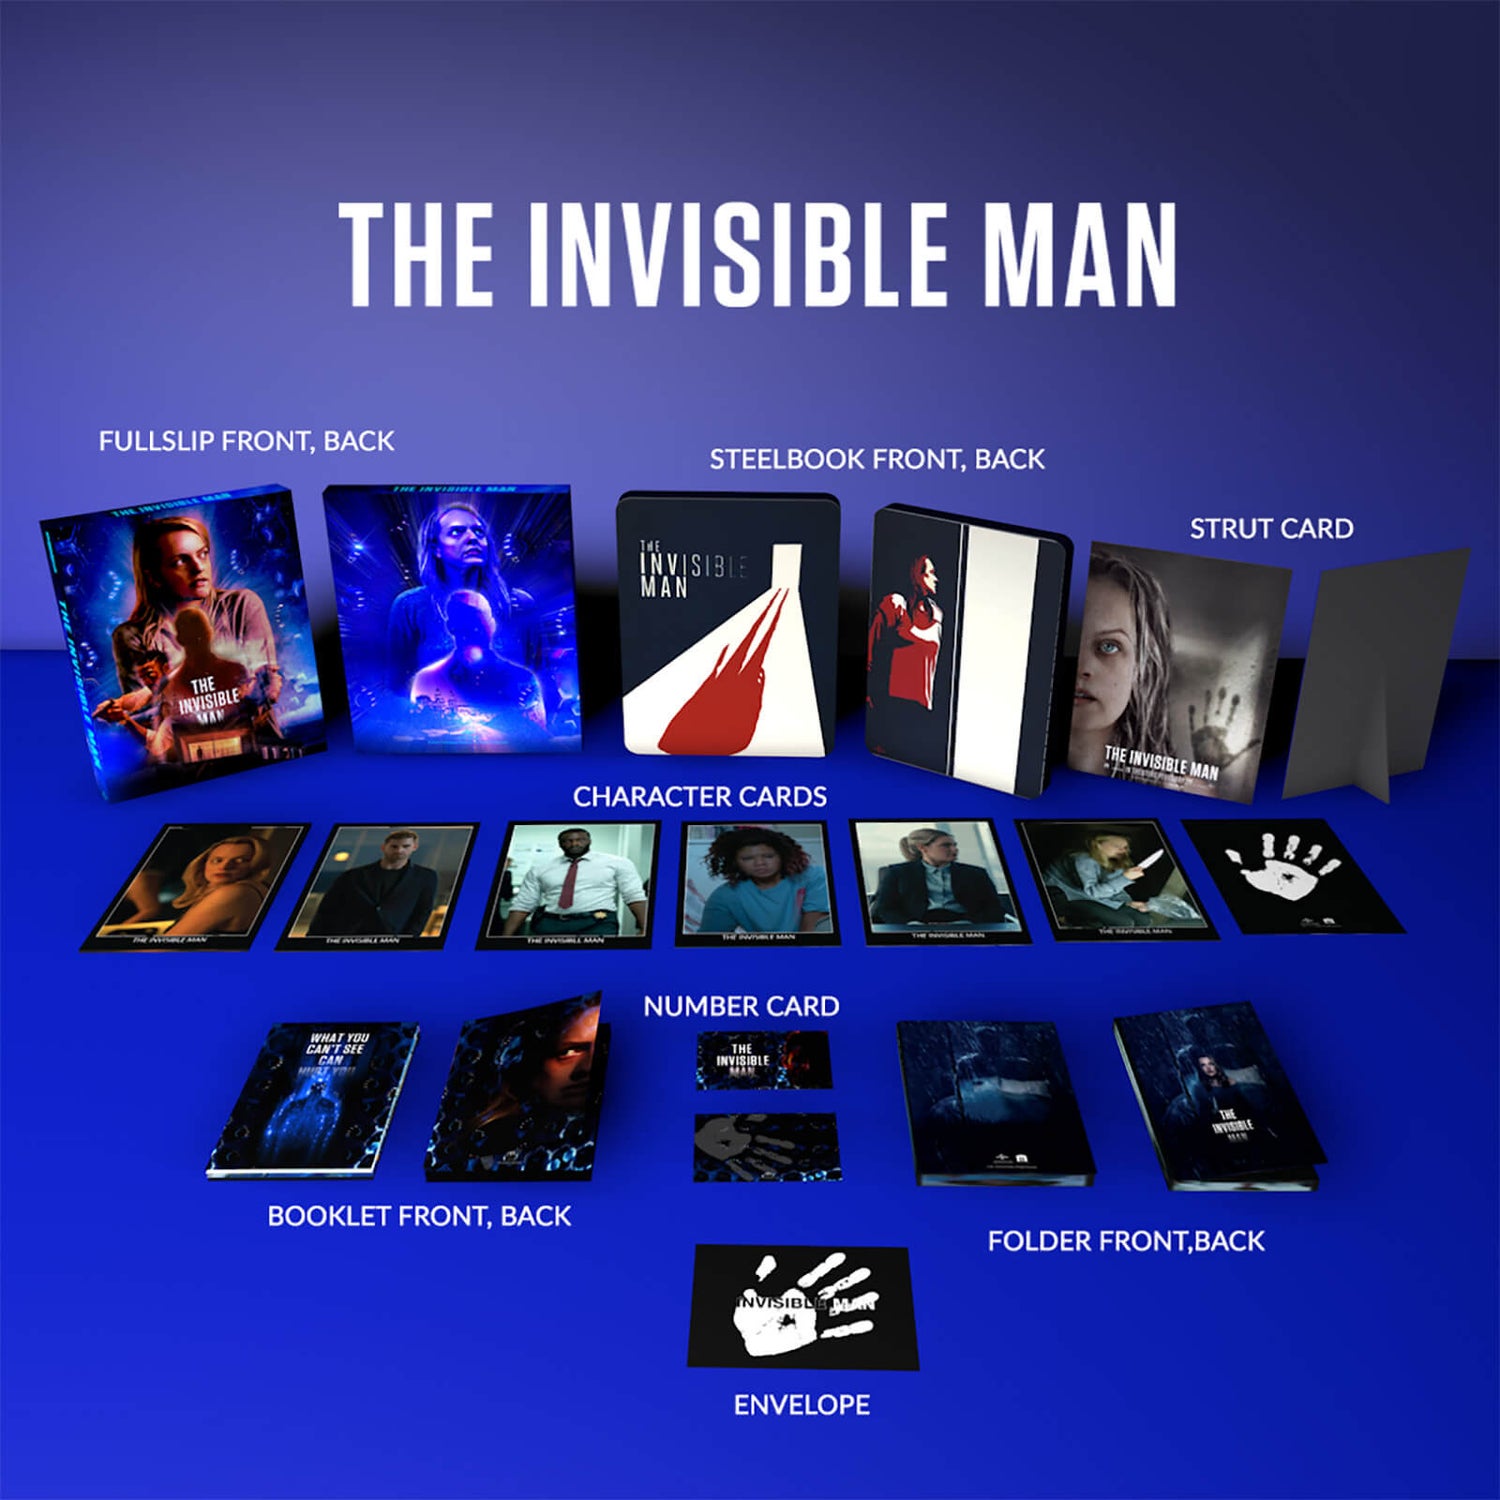 The Invisible Man - 4K Ultra HD Limited Edition Collector's Steelbook (Includes Blu-ray)